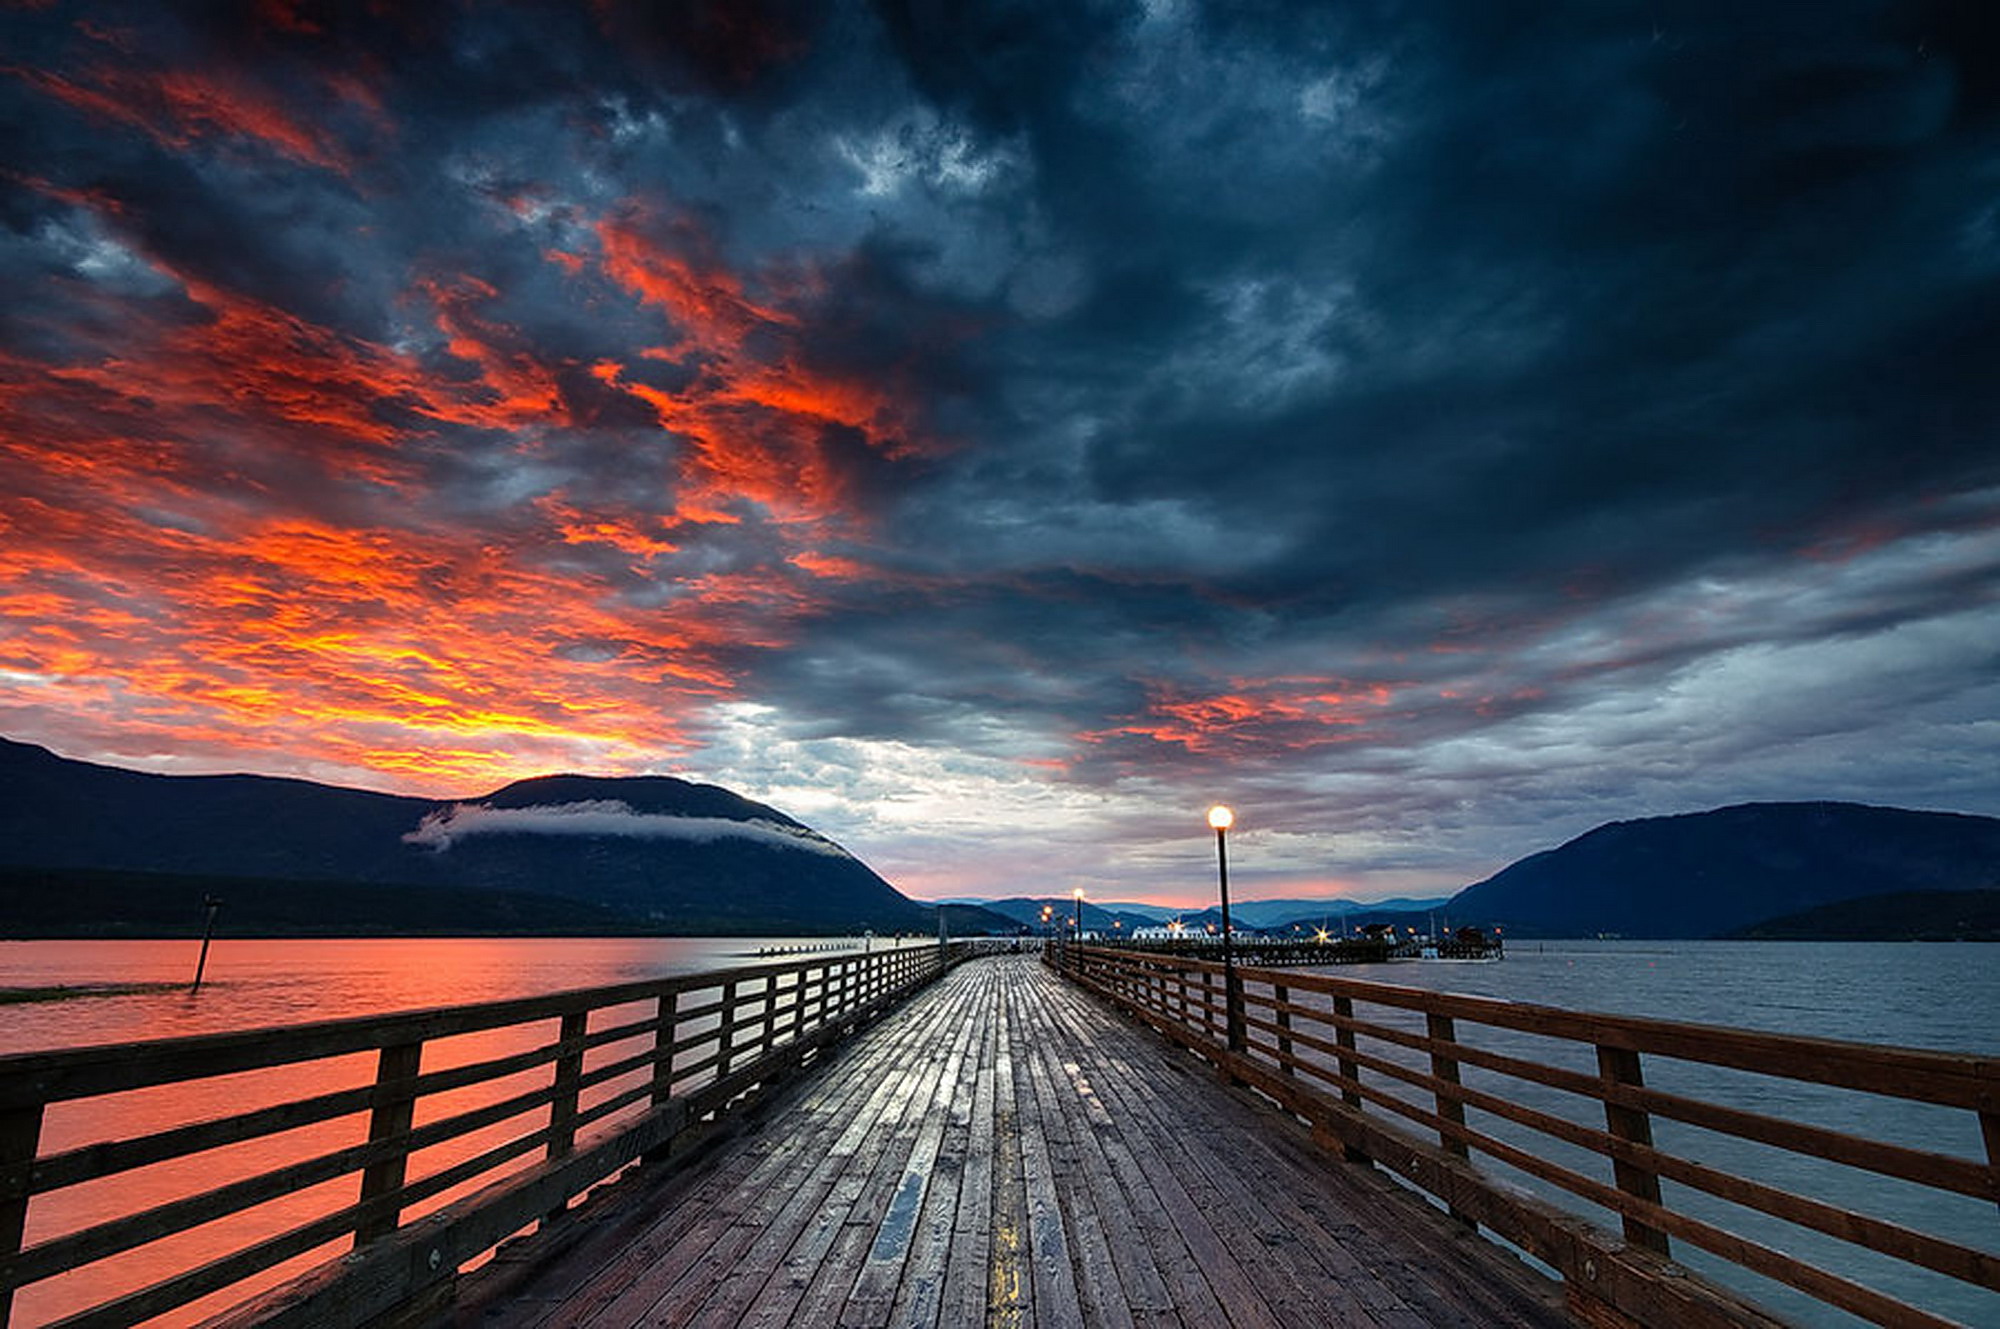 Stormy red sunset over ocean with wharf, captured by Viktoria Haack - a picturesque photography.